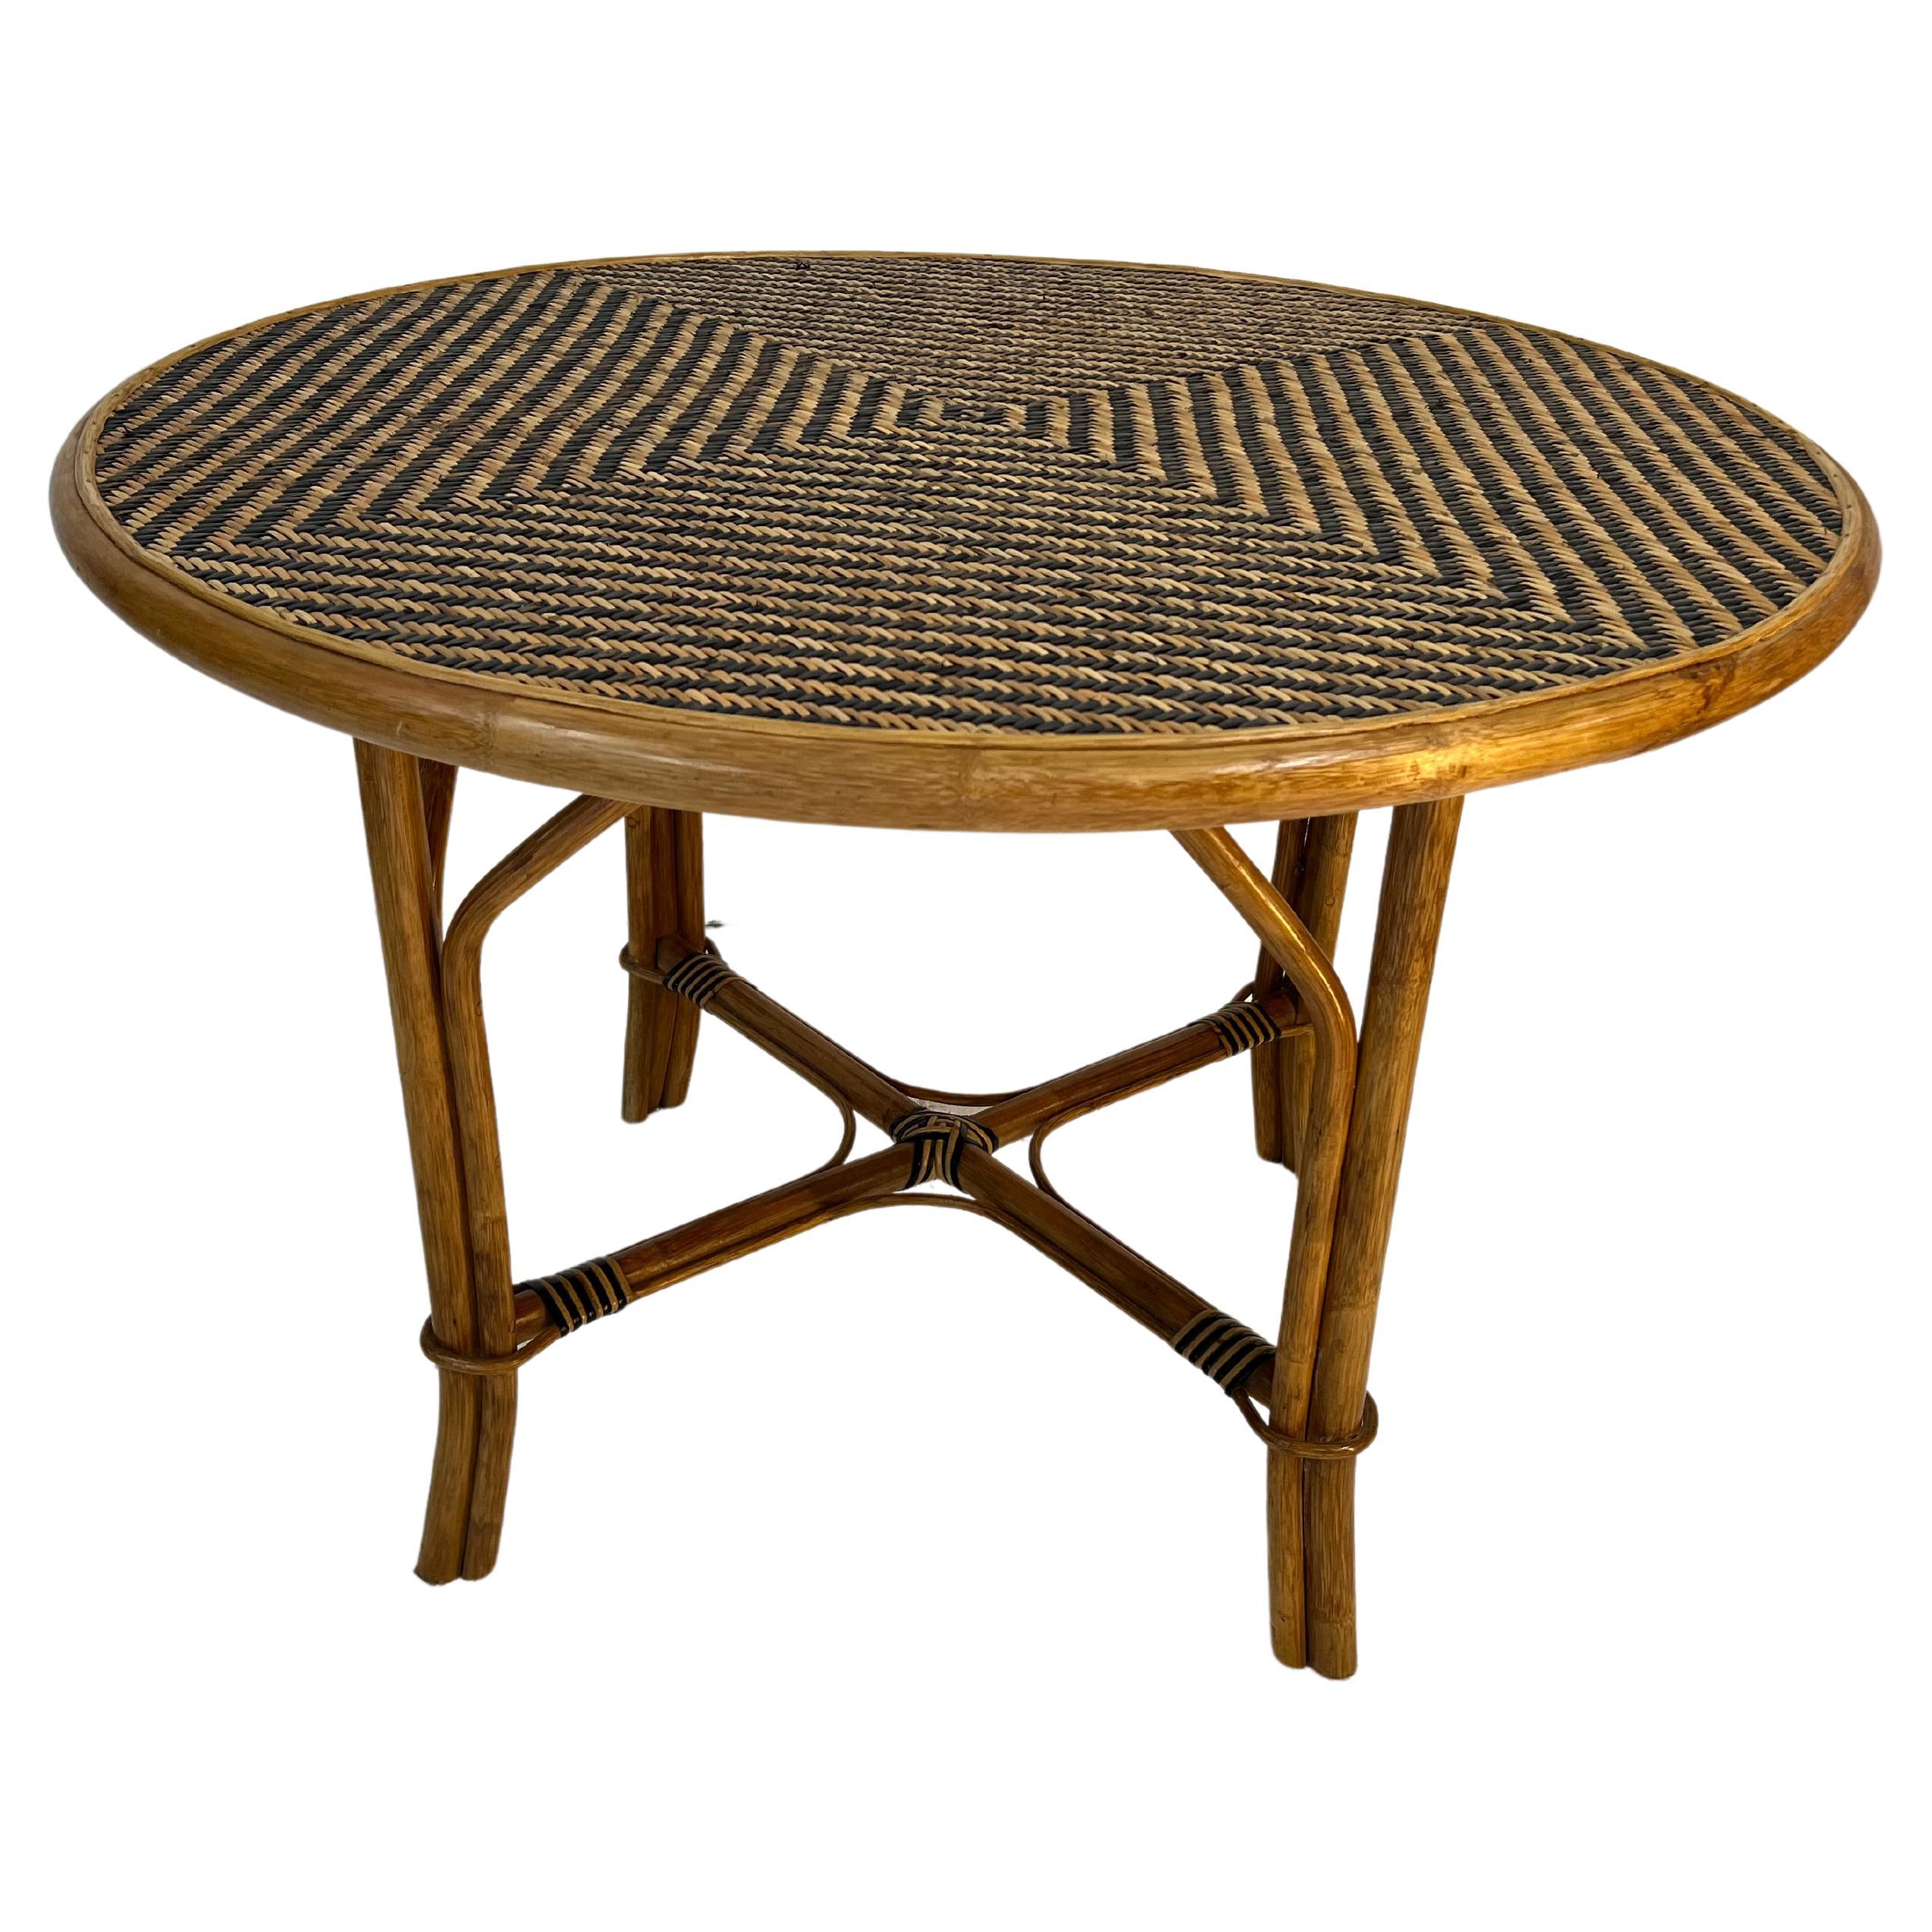 Two Tone Wicker Table 1950s Vintage